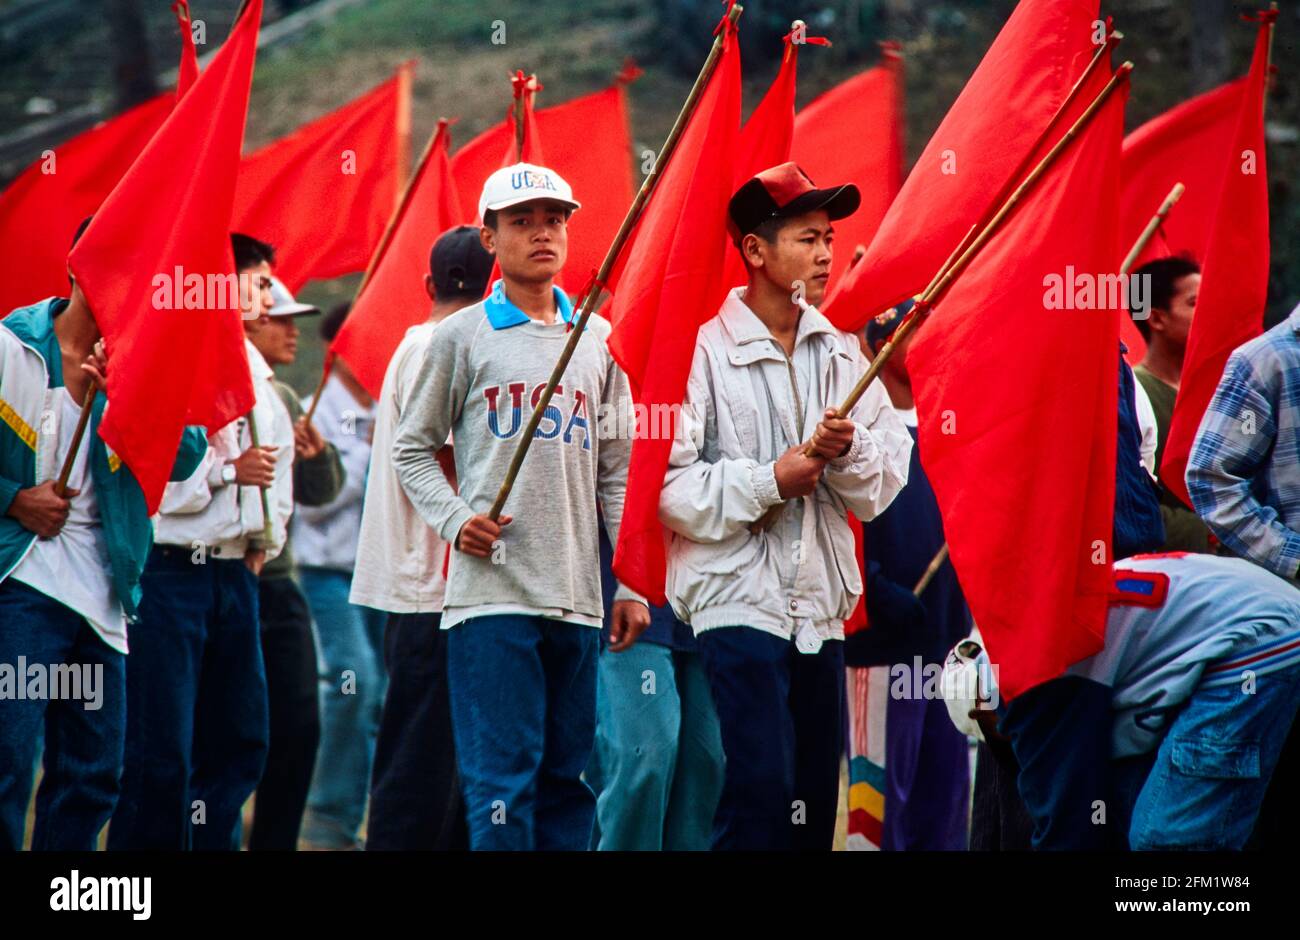 Students in Luang Prabang rehearse for a flag parade. Although the red, socialist flag is in hand, the capitalist USA is in mind. 12/1996 - Christoph Stock Photo